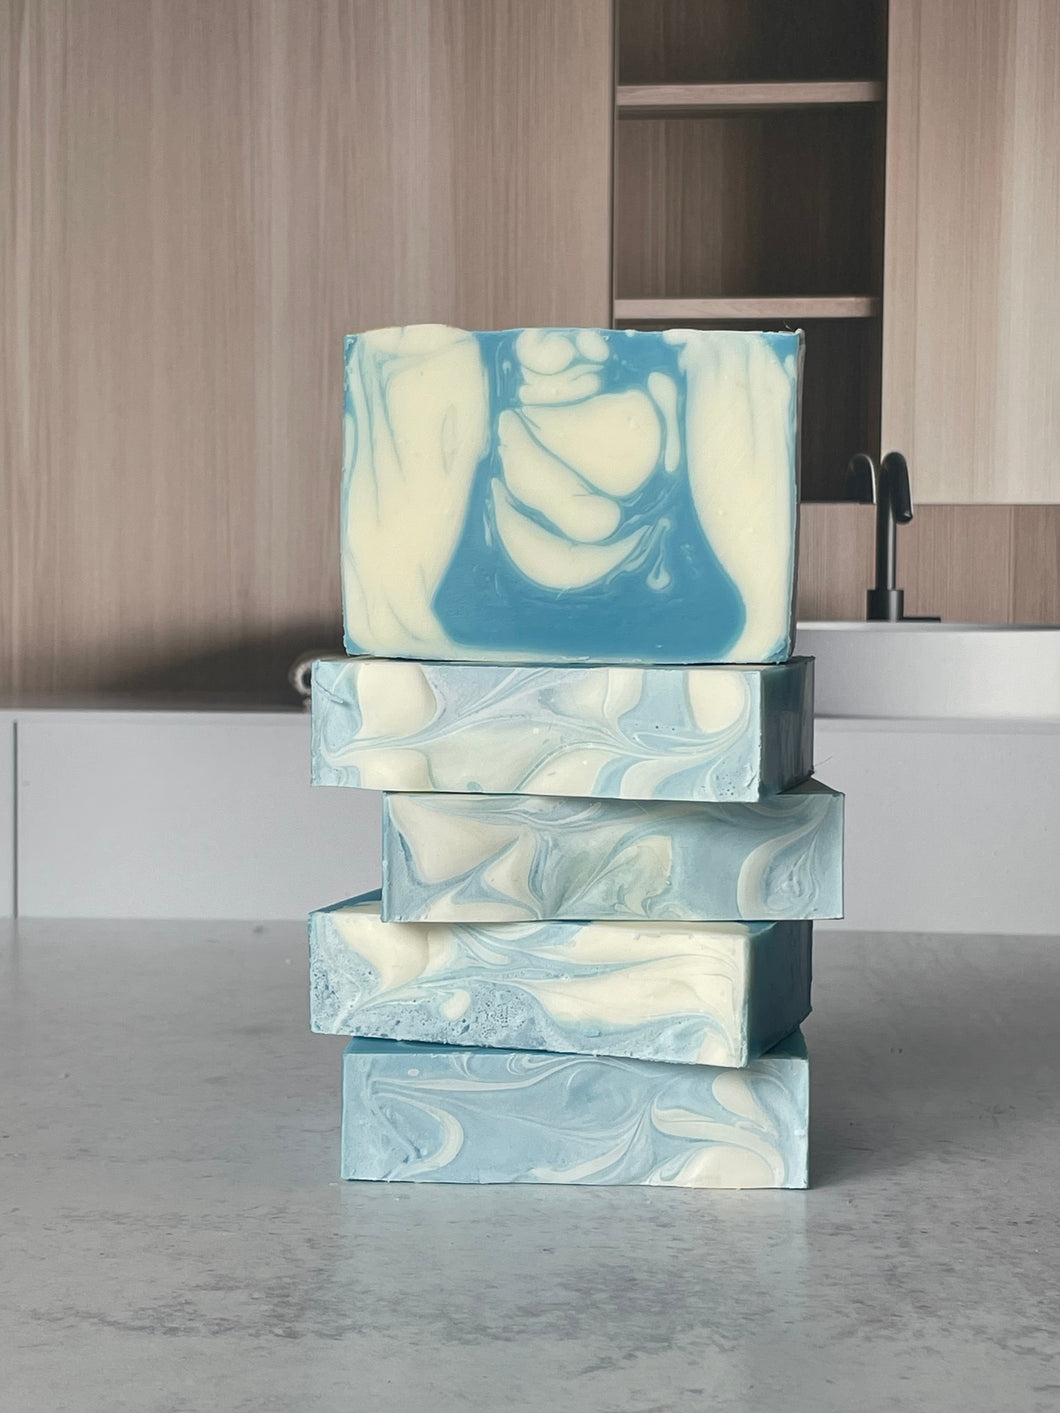 BLUE HANDCRAFTED SOAP